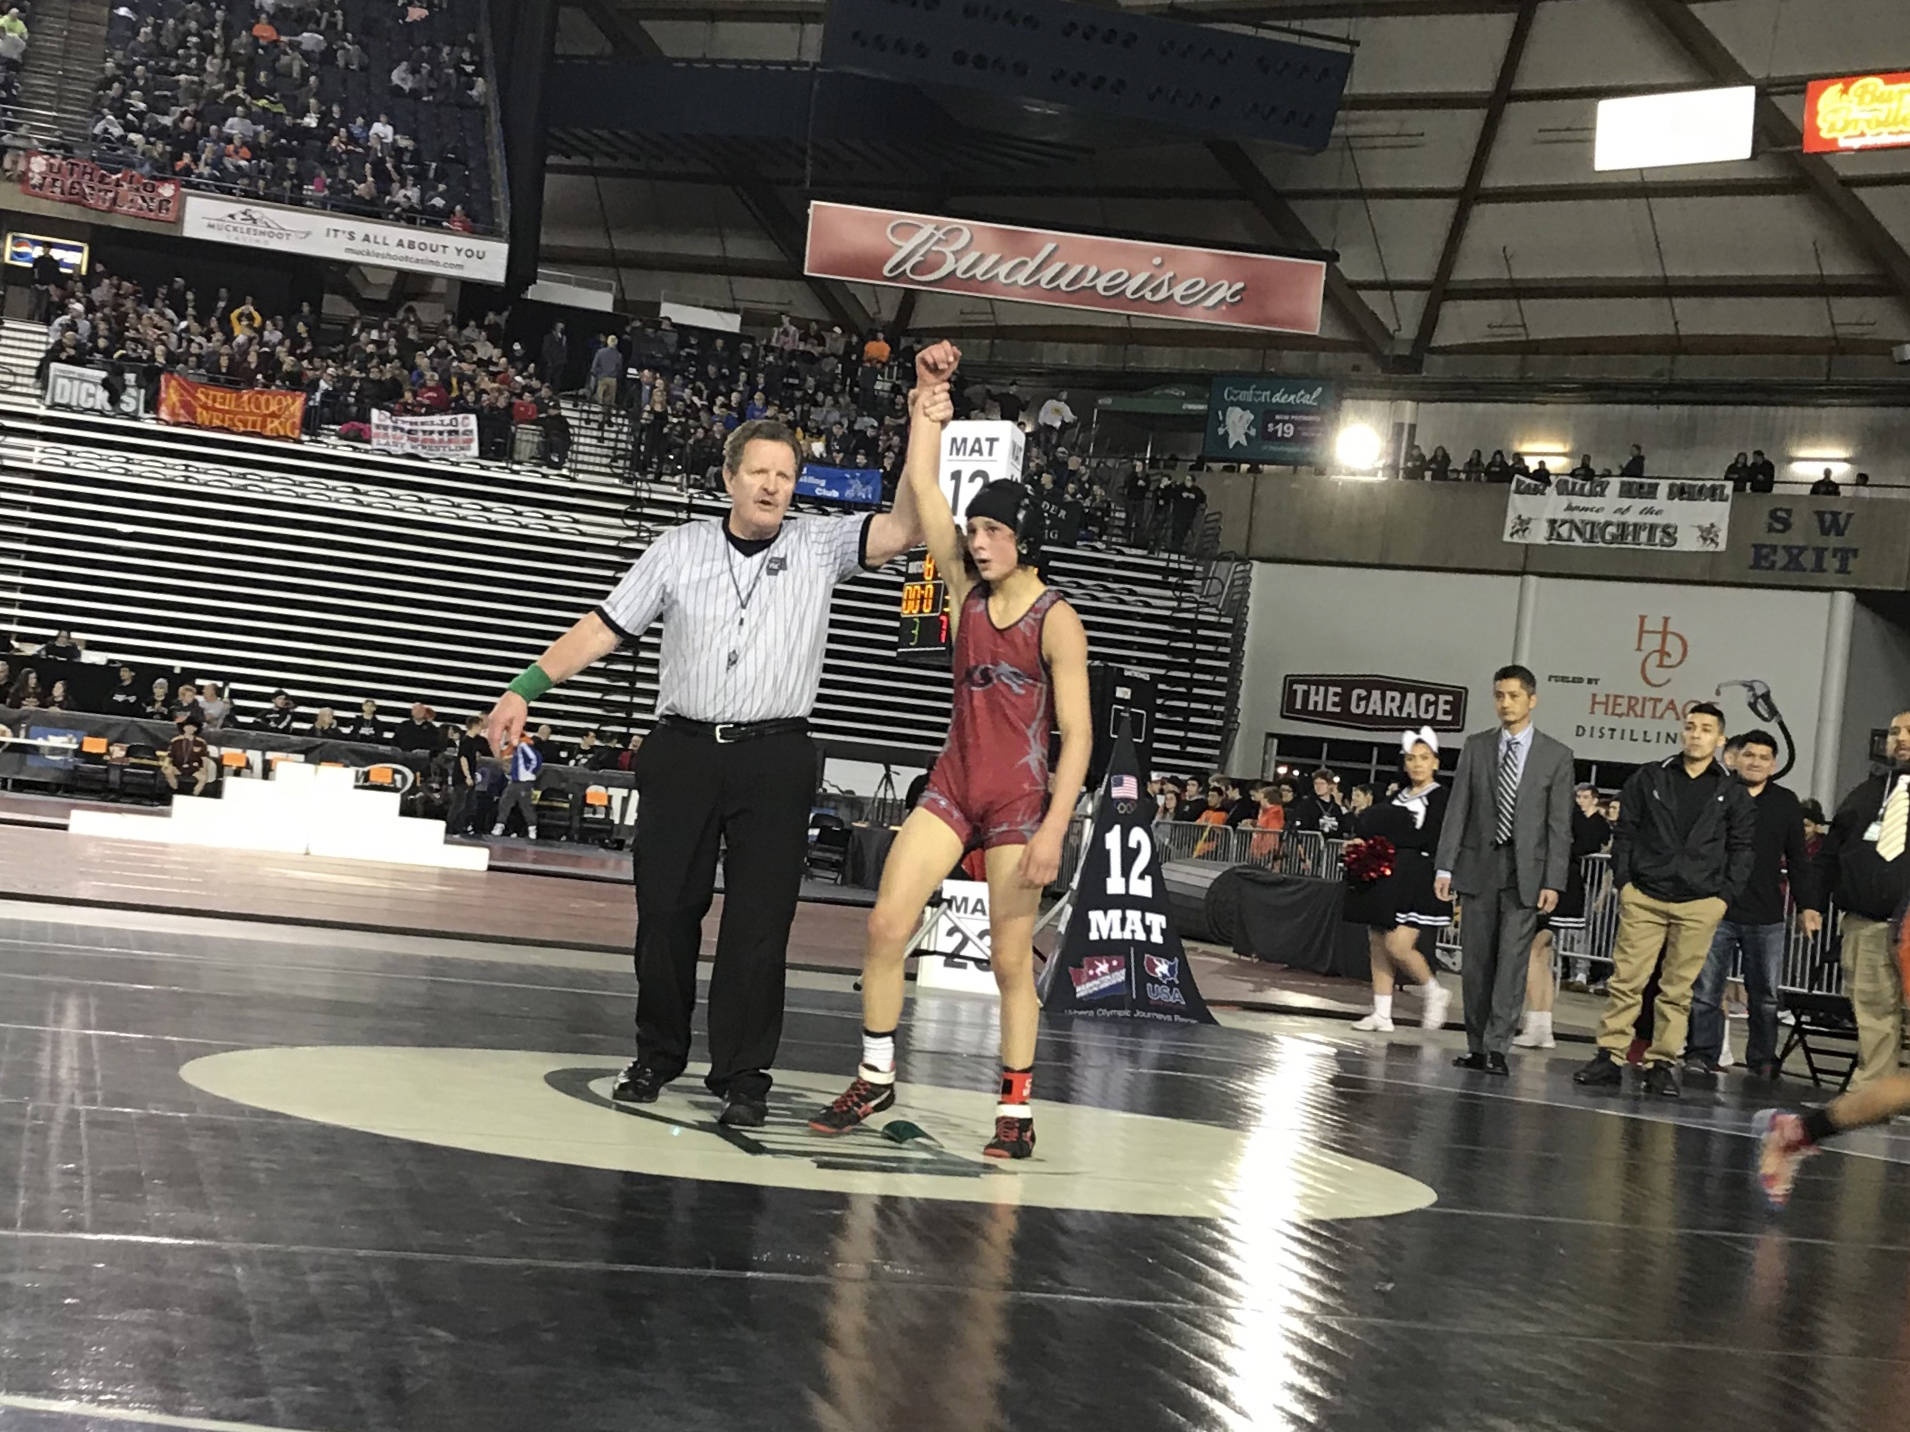 Mount Si Wildcats sophomore Tryon Kaess earned first place in the Mat Classic Class 4A state tournament in the 106-pound division. Kaess defeated Davis wrestler Jaden Sanchez 7-3 in the championship match on Feb. 16 at the Tacoma Dome. Shaun Scott, staff photo